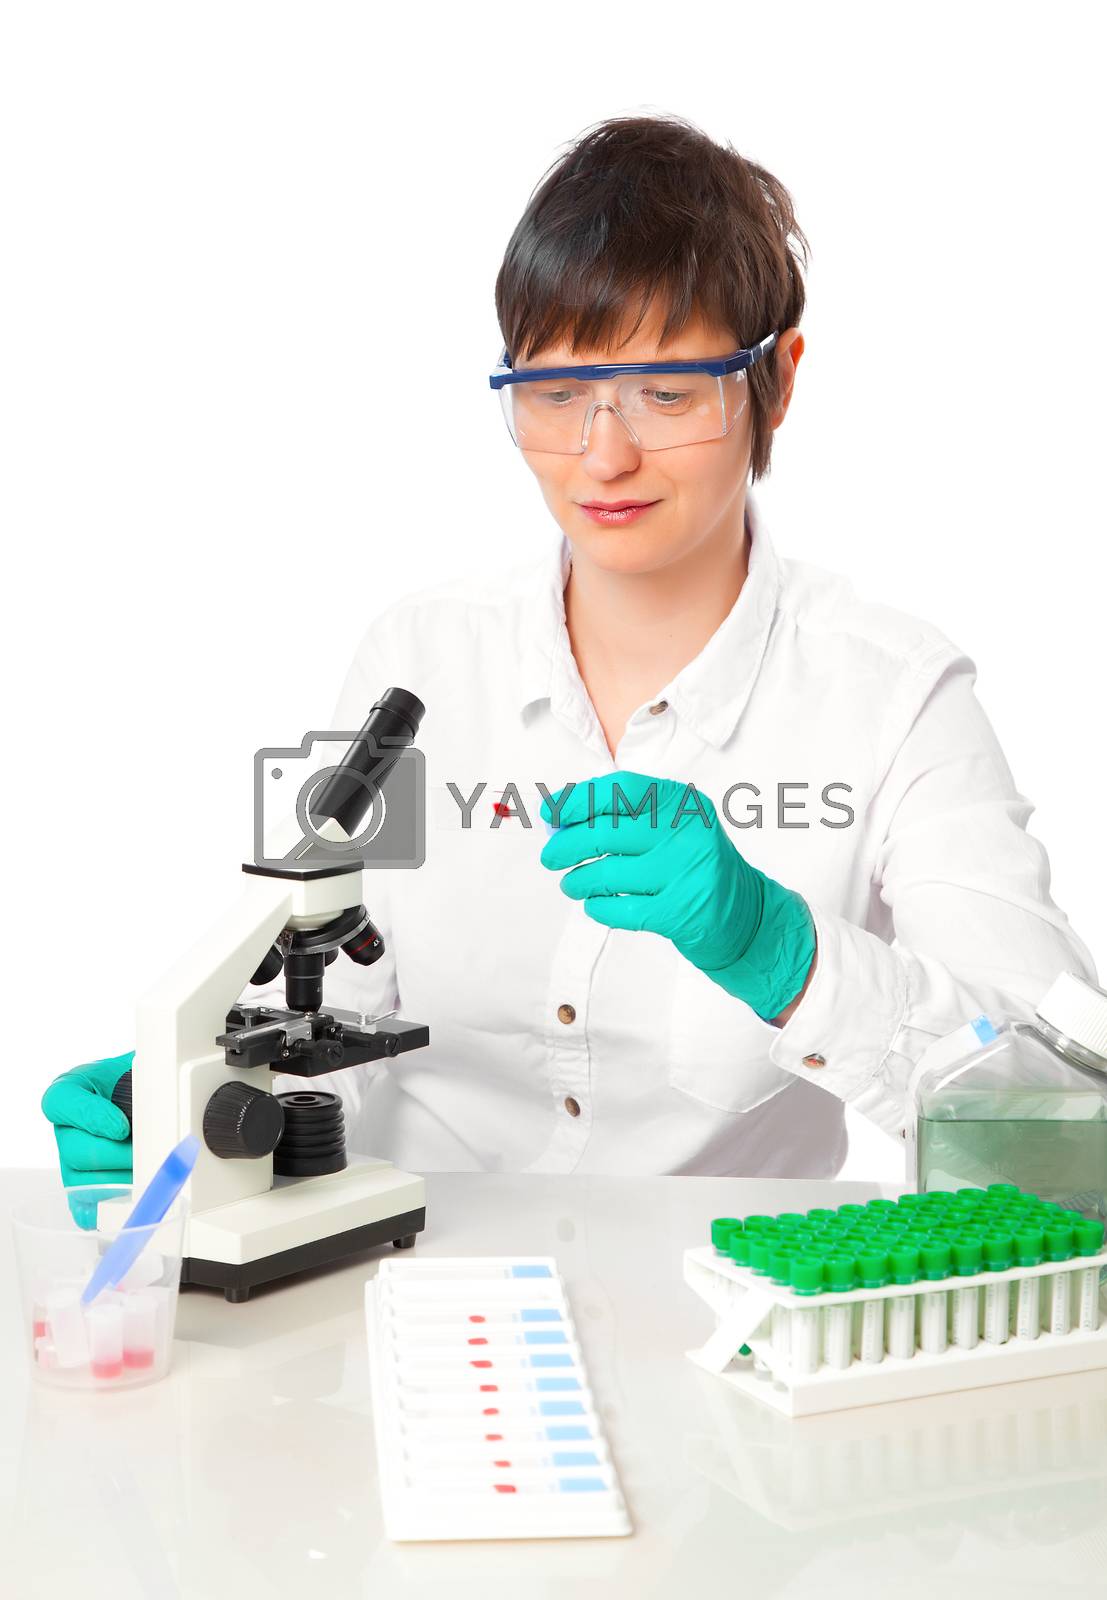 Royalty free image of Girl working at the laboratory with microscope by motorolka